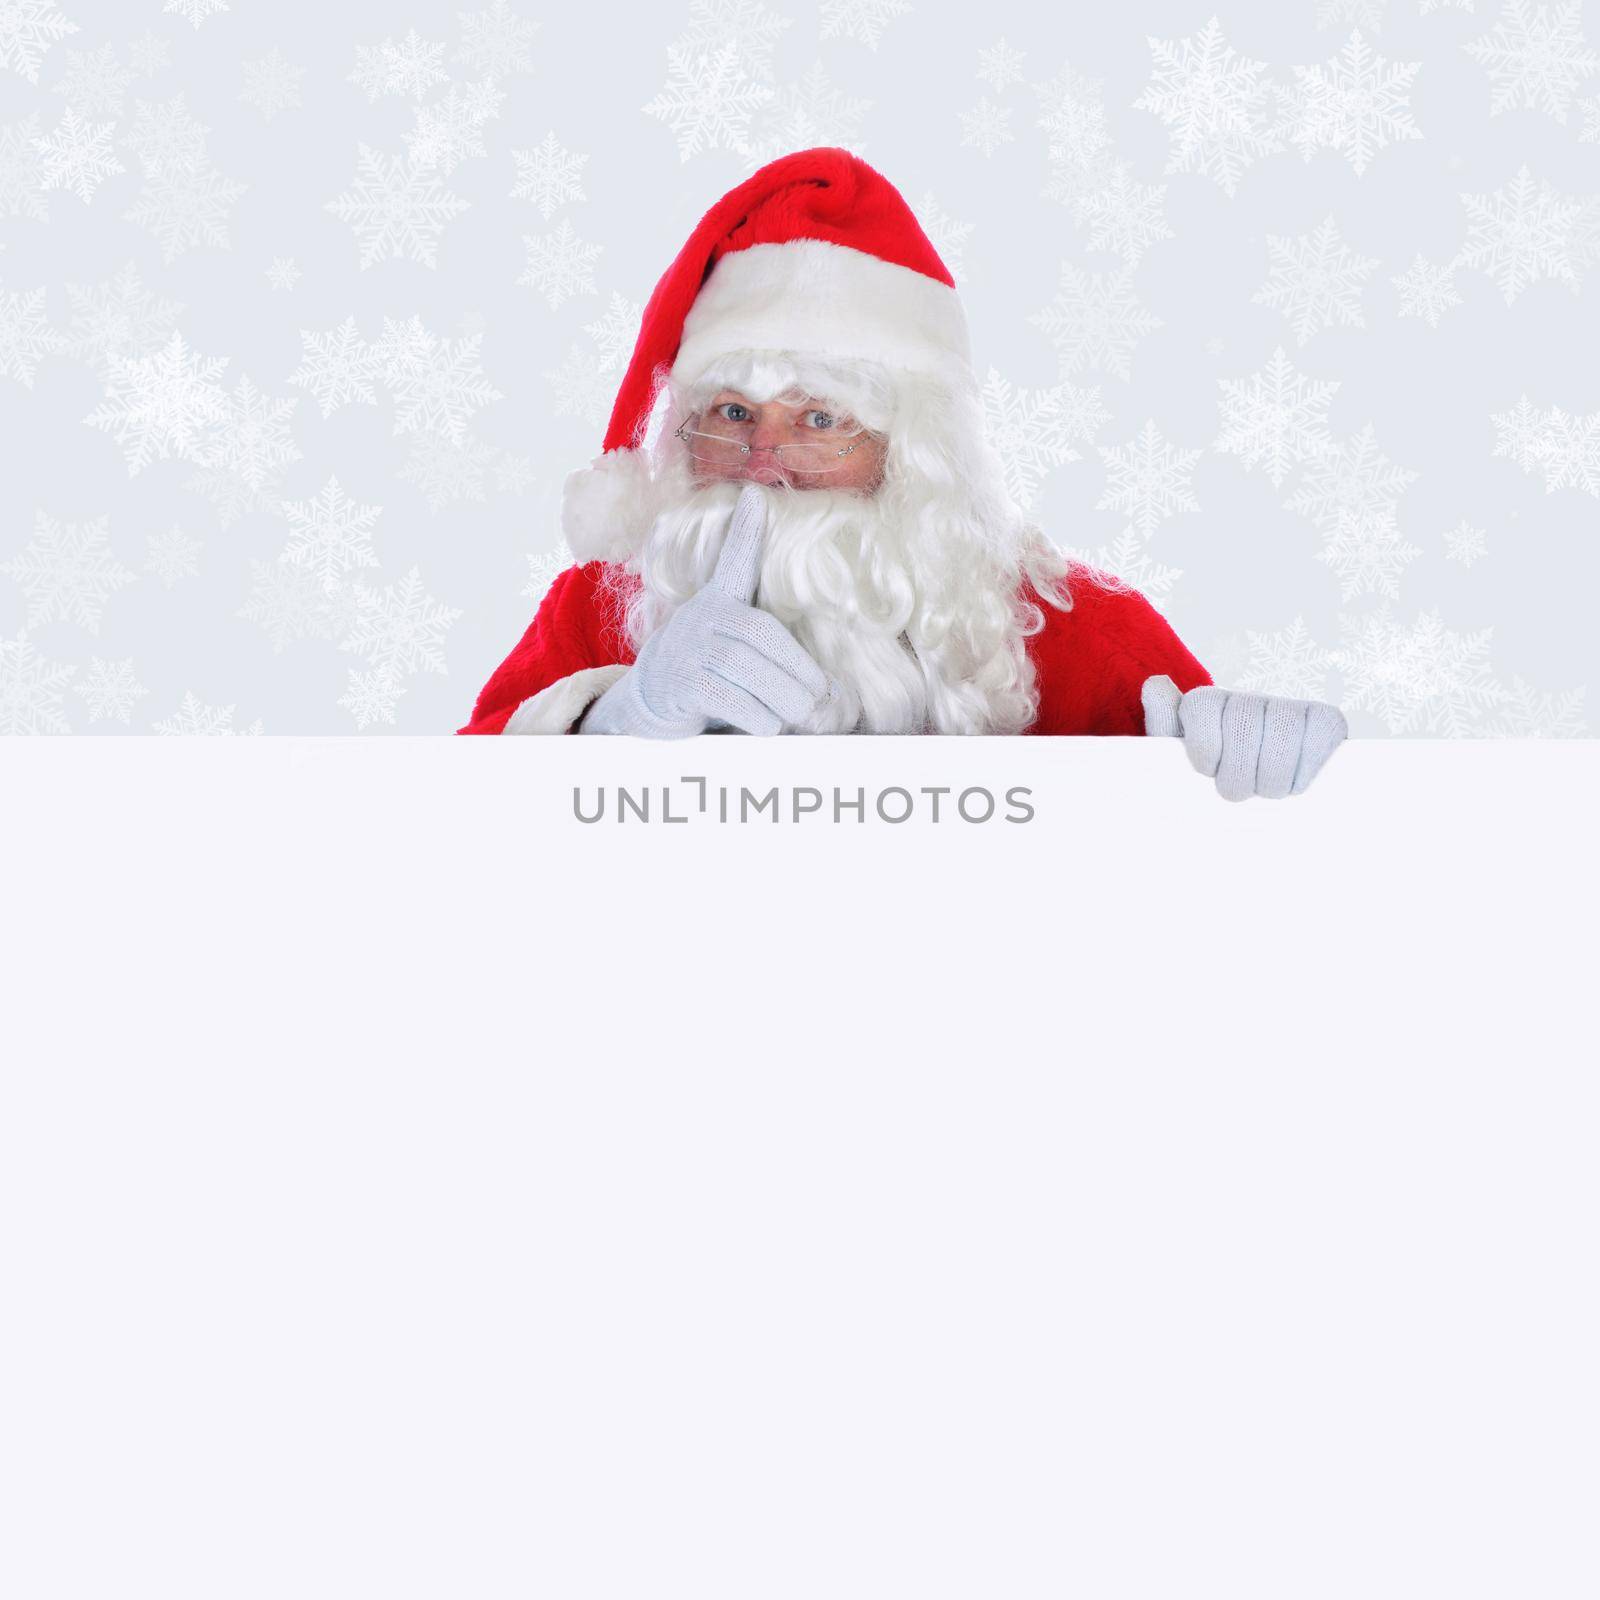 Santa Claus with blank sign making shhh sign with finger in front of face with a light silver background with snow flakes.